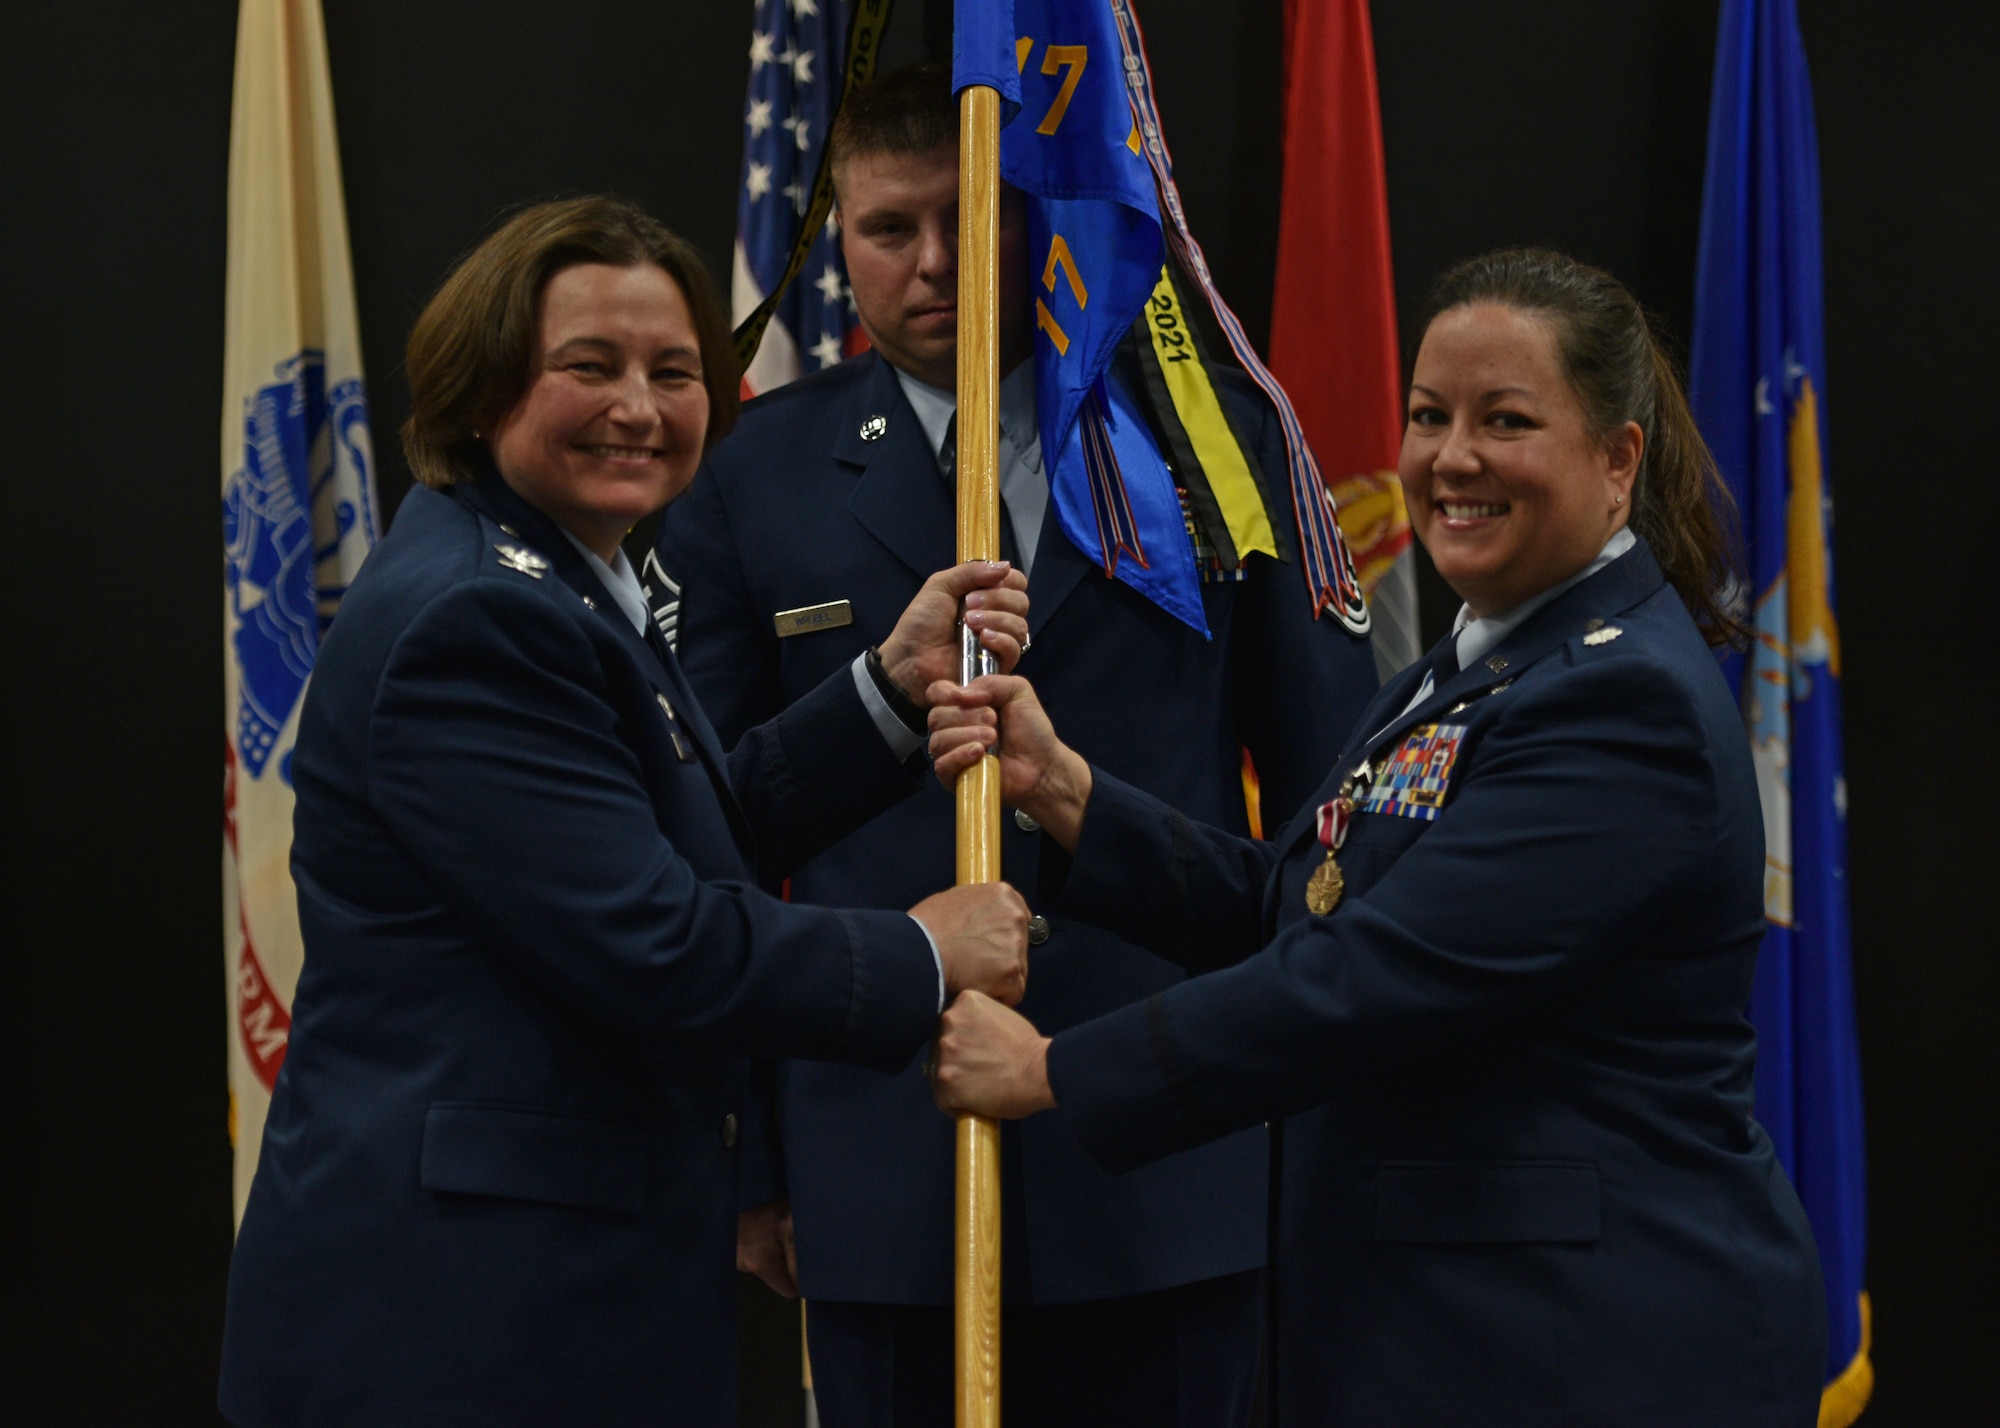 U.S. Air Force Lt. Col. Linda Davis, right, 17th Training Support Squadron outgoing commander, relinquishes command to Col. Angelina Maguinness, 17th Training Group commander, during the 17th TRSS change of command ceremony at the Powell Event Center, Goodfellow Air Force Base, Texas, June 17, 2022. Passing the guidon physically represents the symbolism of passing the squadron responsibilities to the next commander. (U.S. Air Force photo by Senior Airman Ashley Thrash)